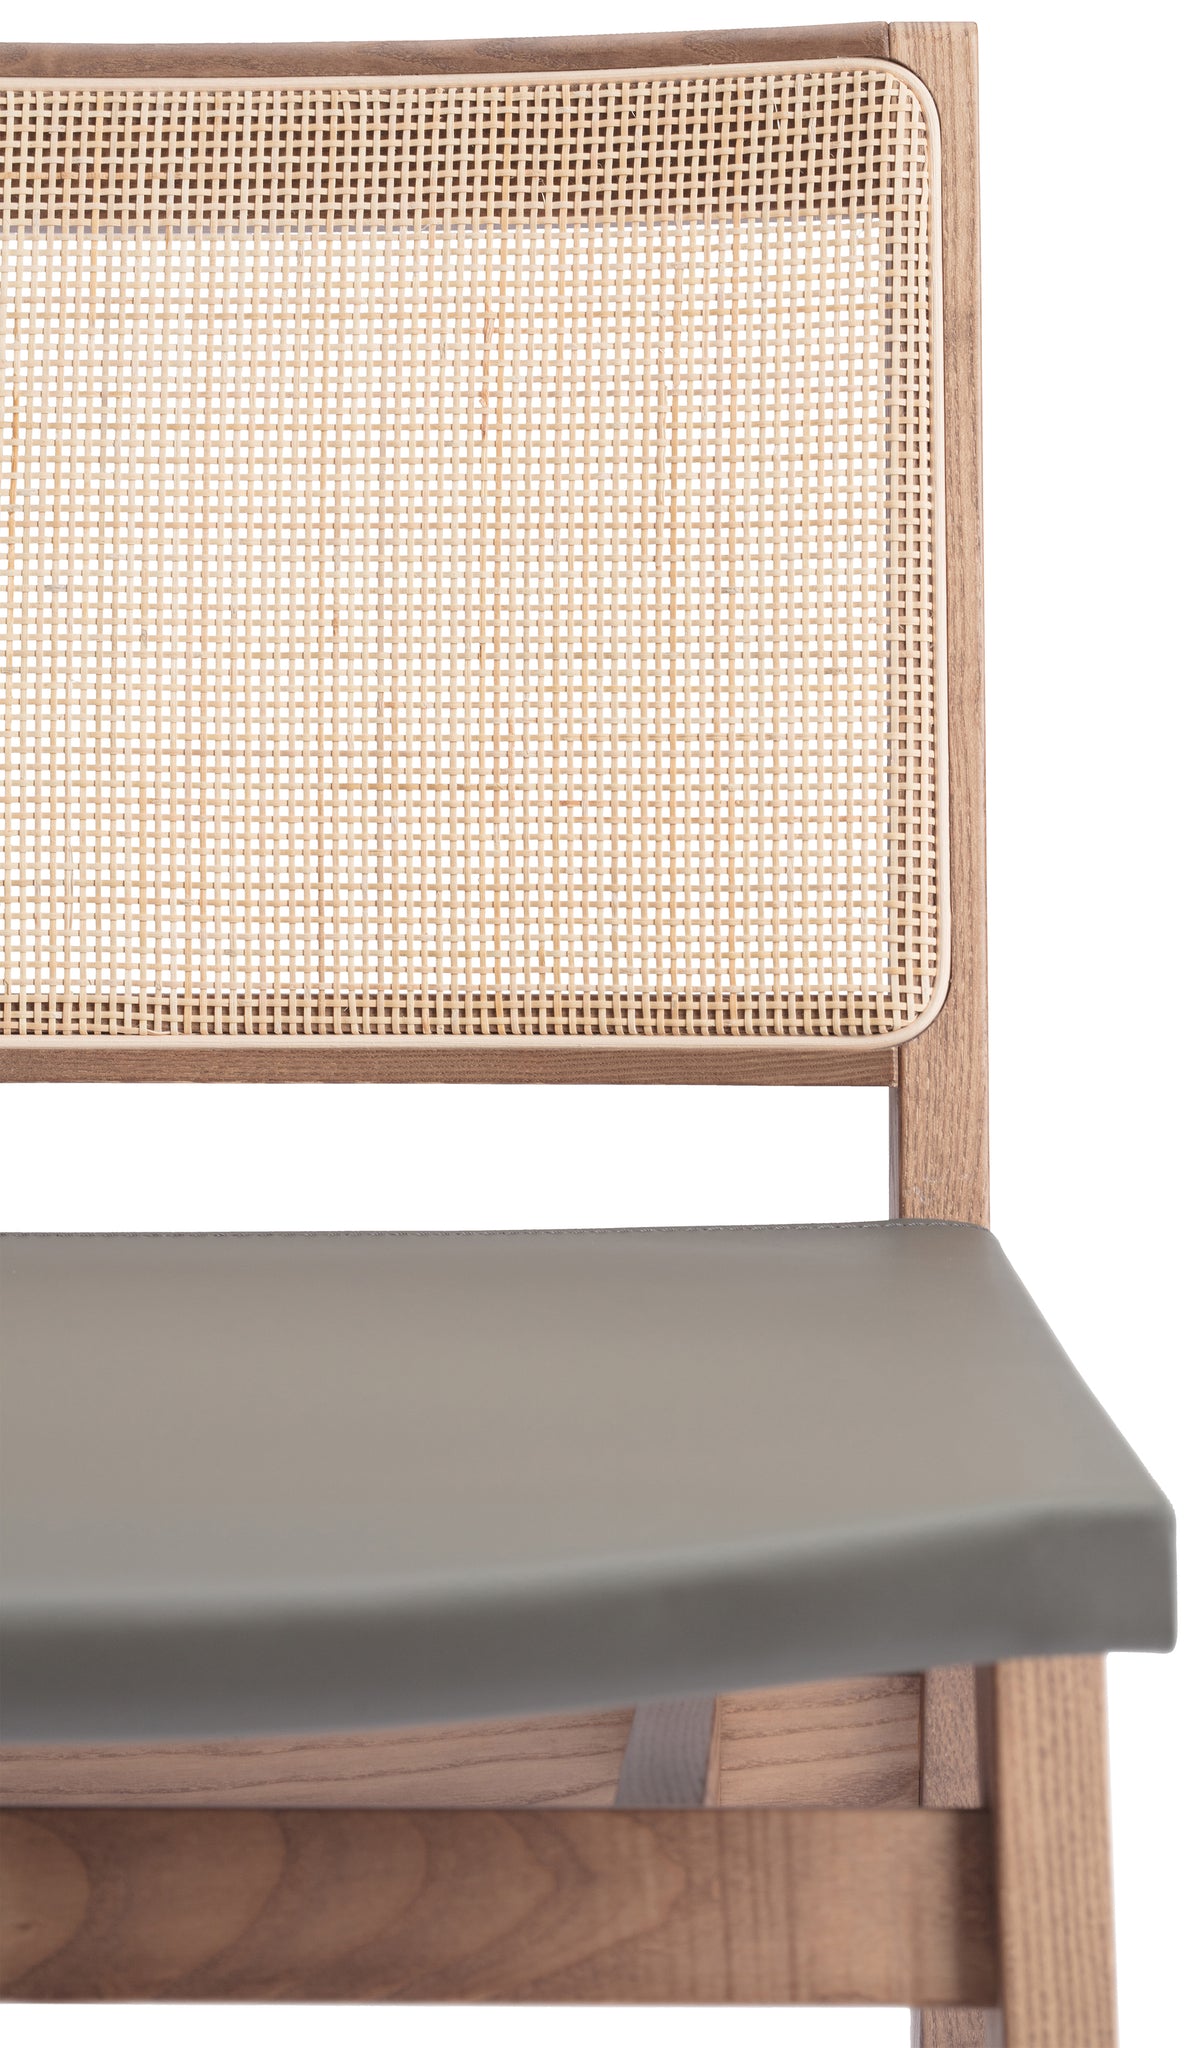 Close-up 1 of an "Elye" modern dining chair, walnut stained ash frame, square weave cane back, contract grade off white leather seat, produced by Klarel in Italy. #K41-2